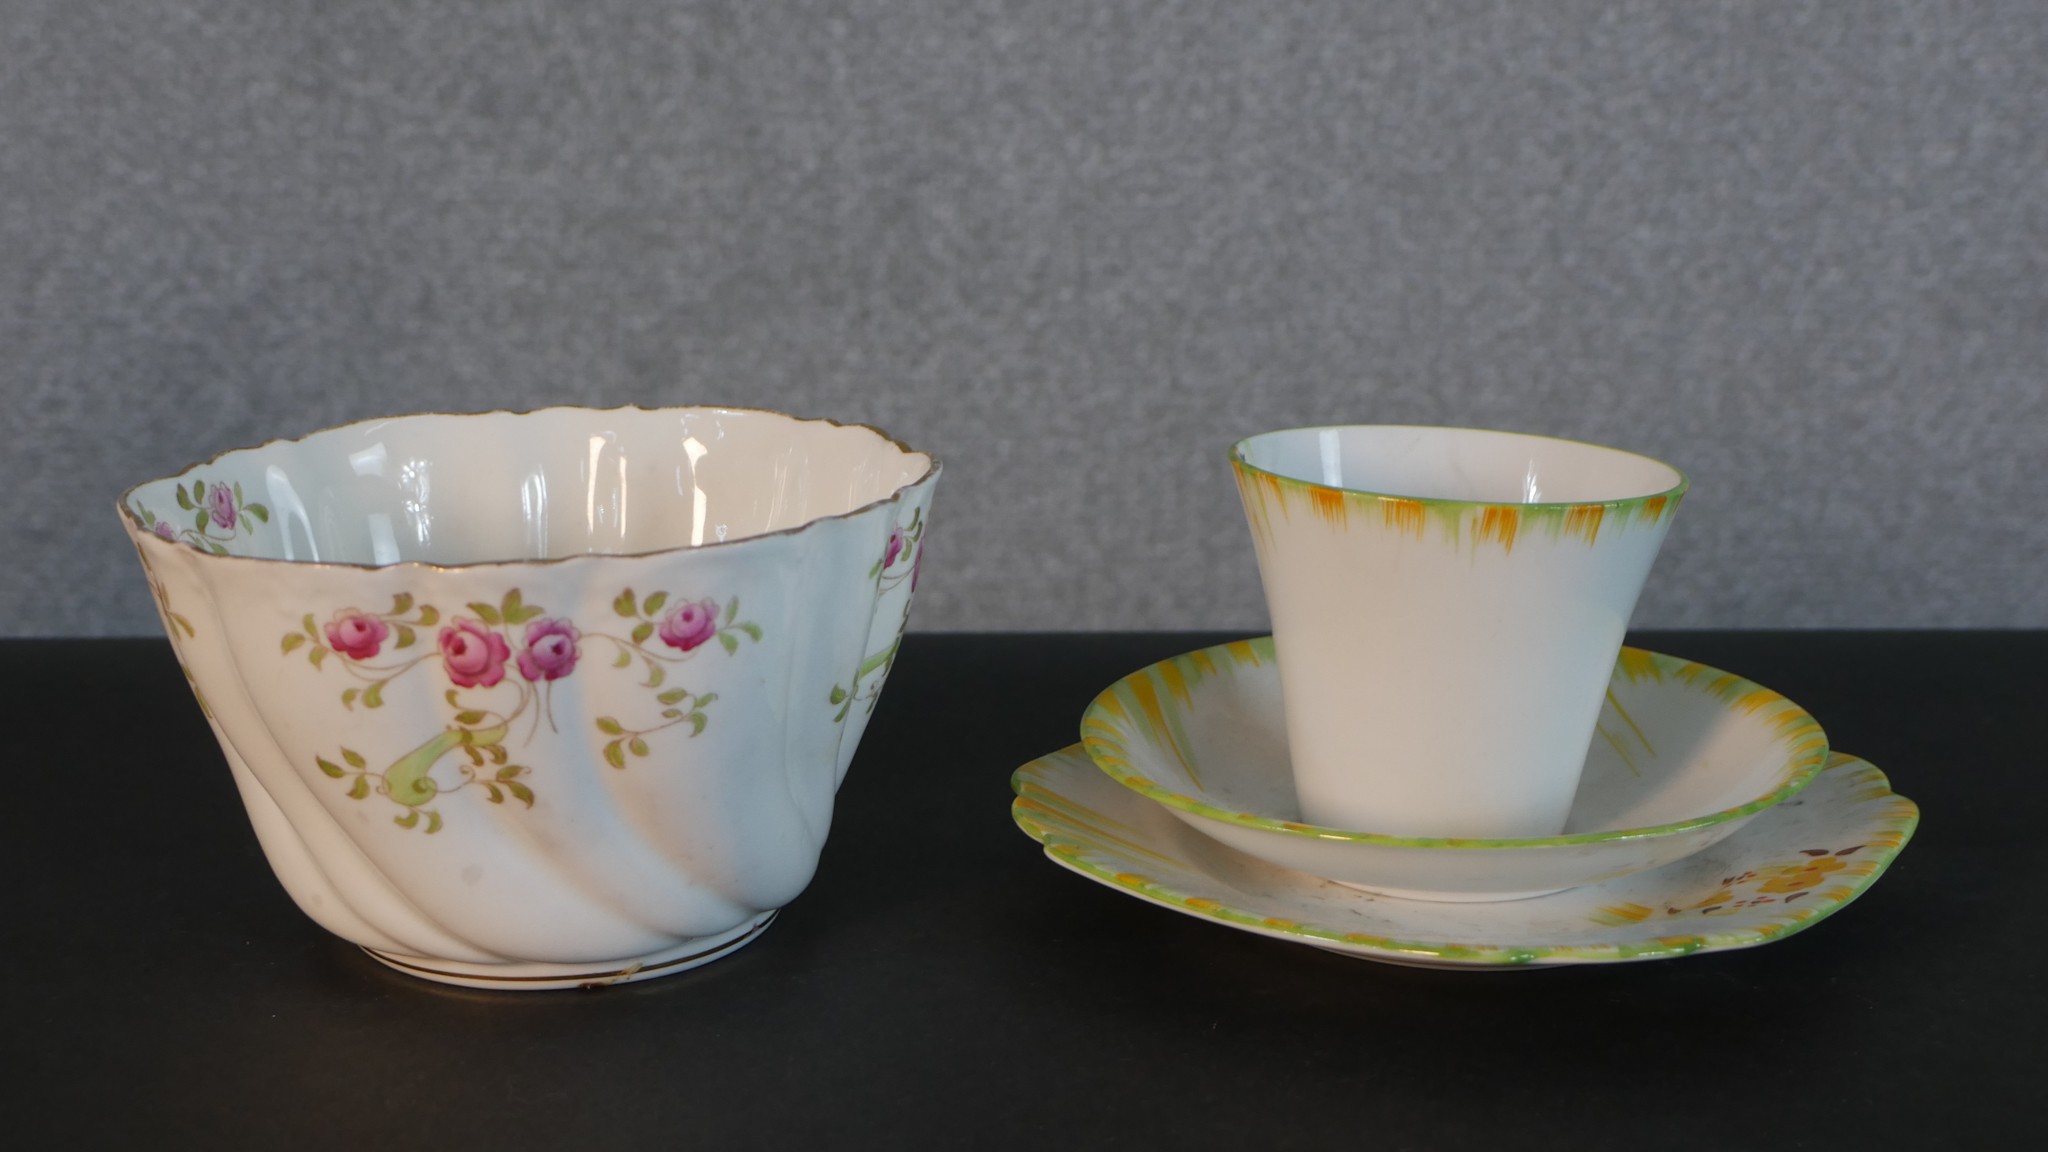 A De La Reine hand painted floral design vintage coffee set for one along with various other - Image 4 of 10